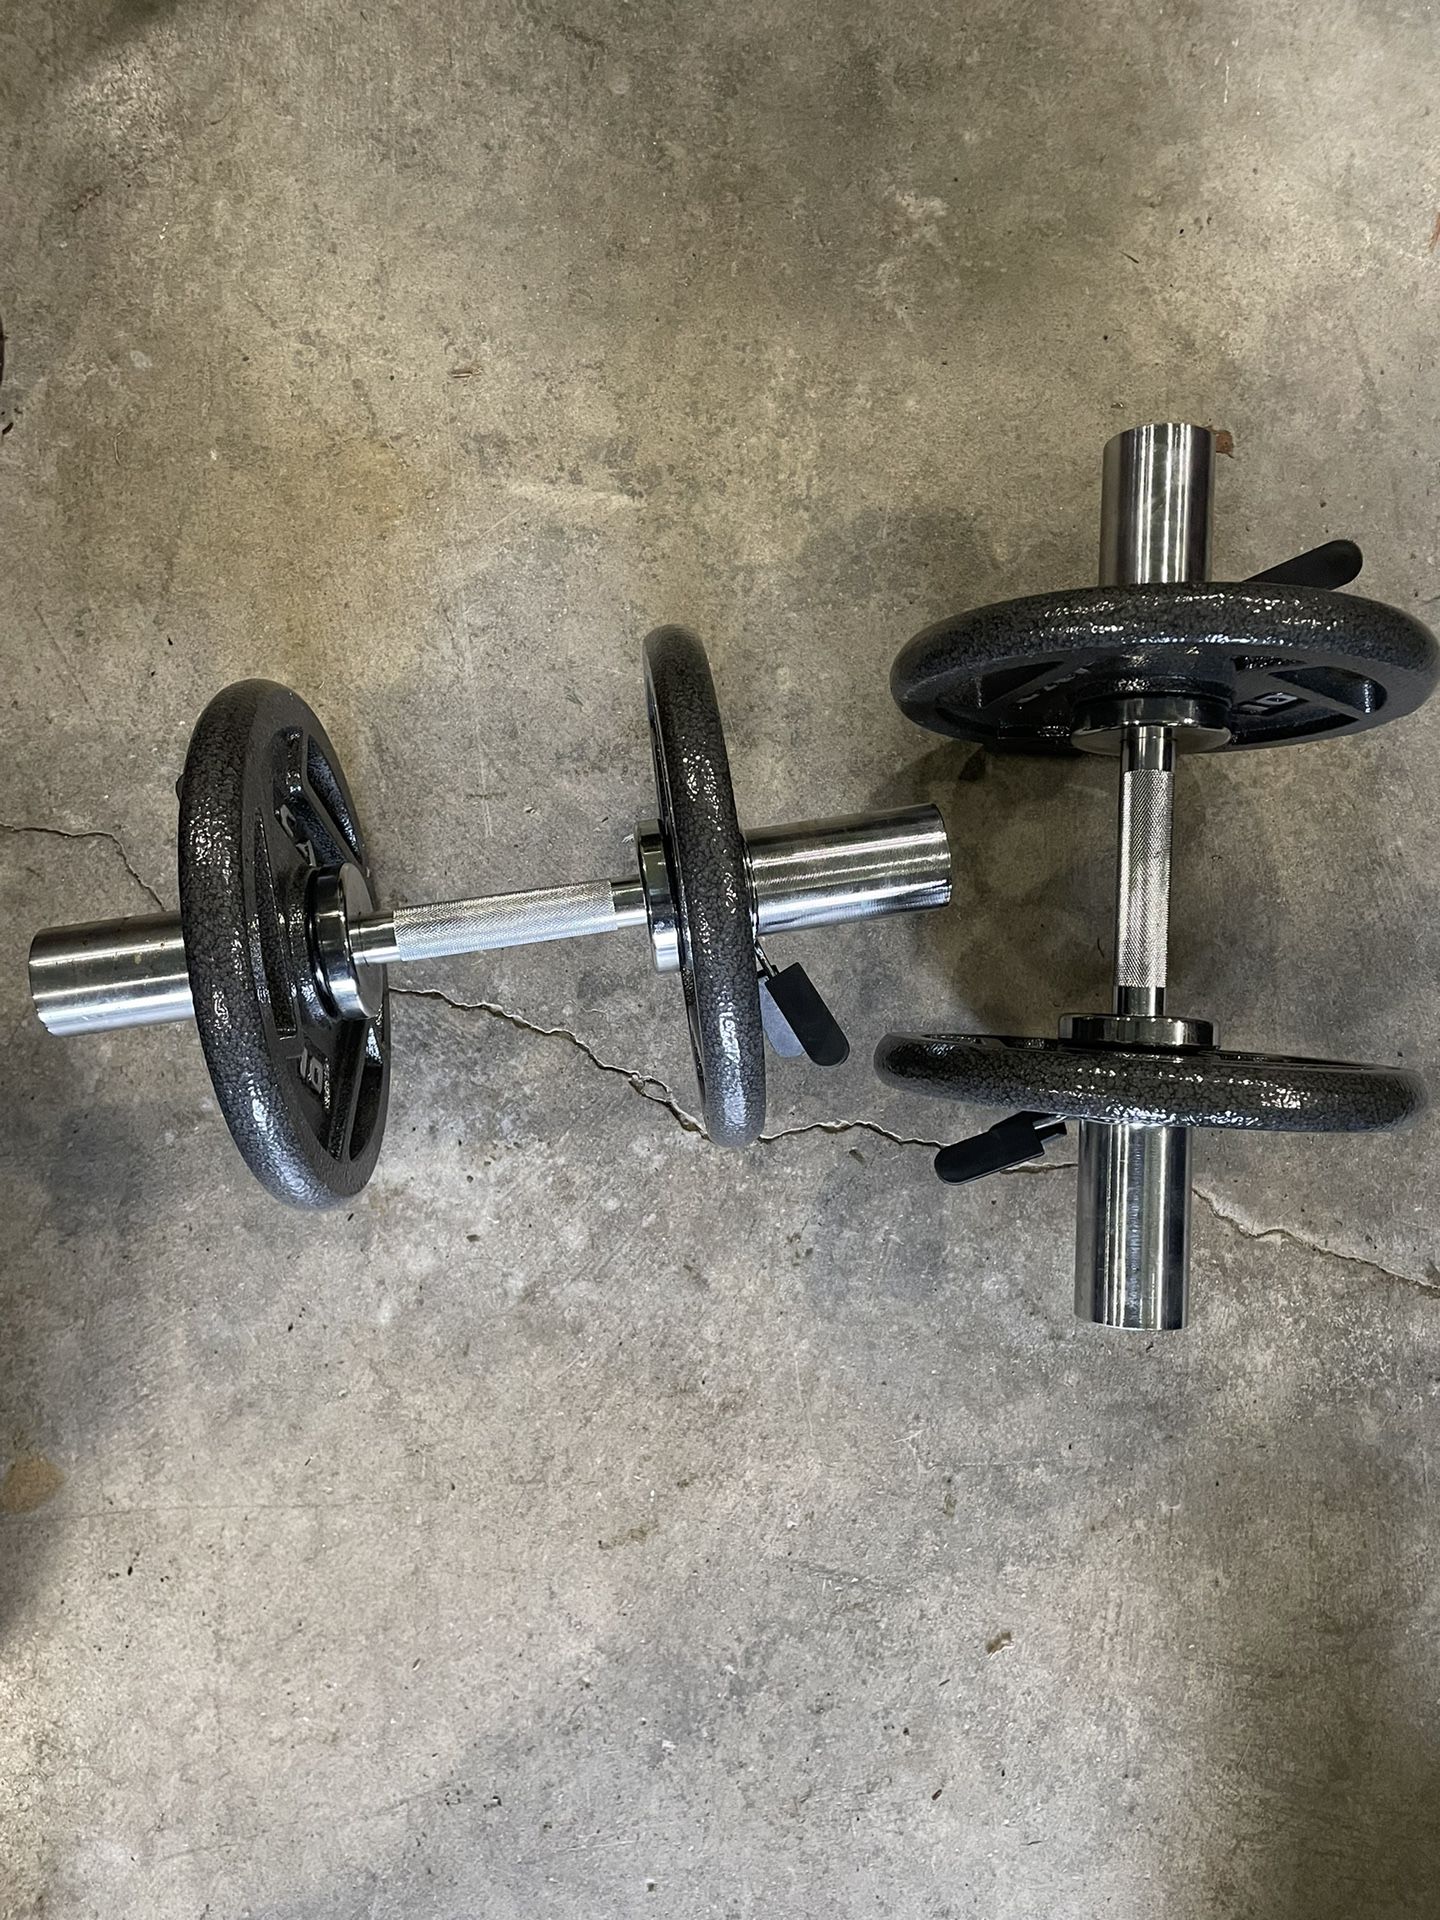 Reloadable Dumbbell Set And Weights 